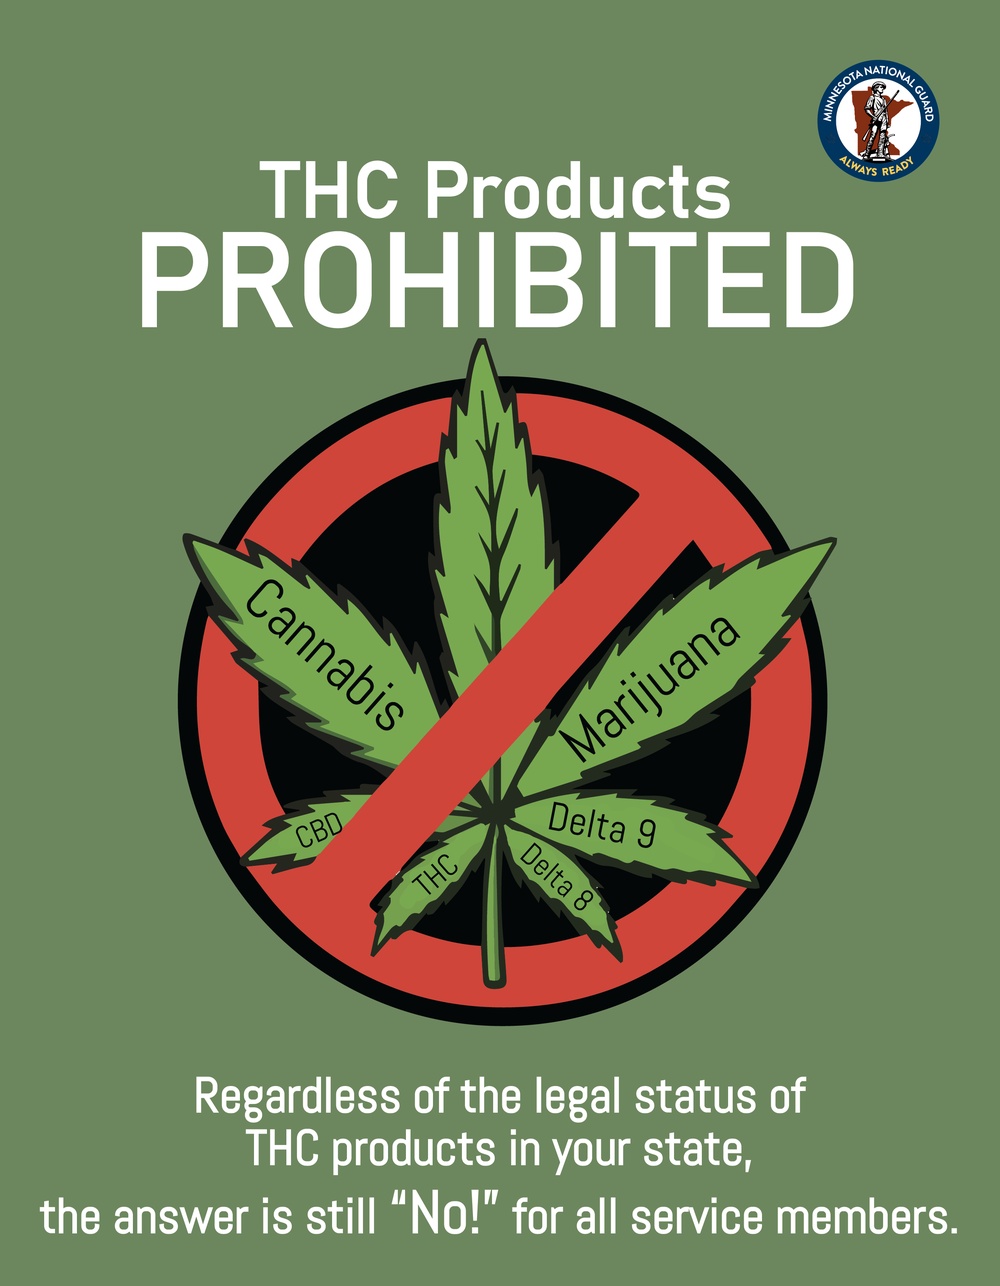 THC Products are Prohibited